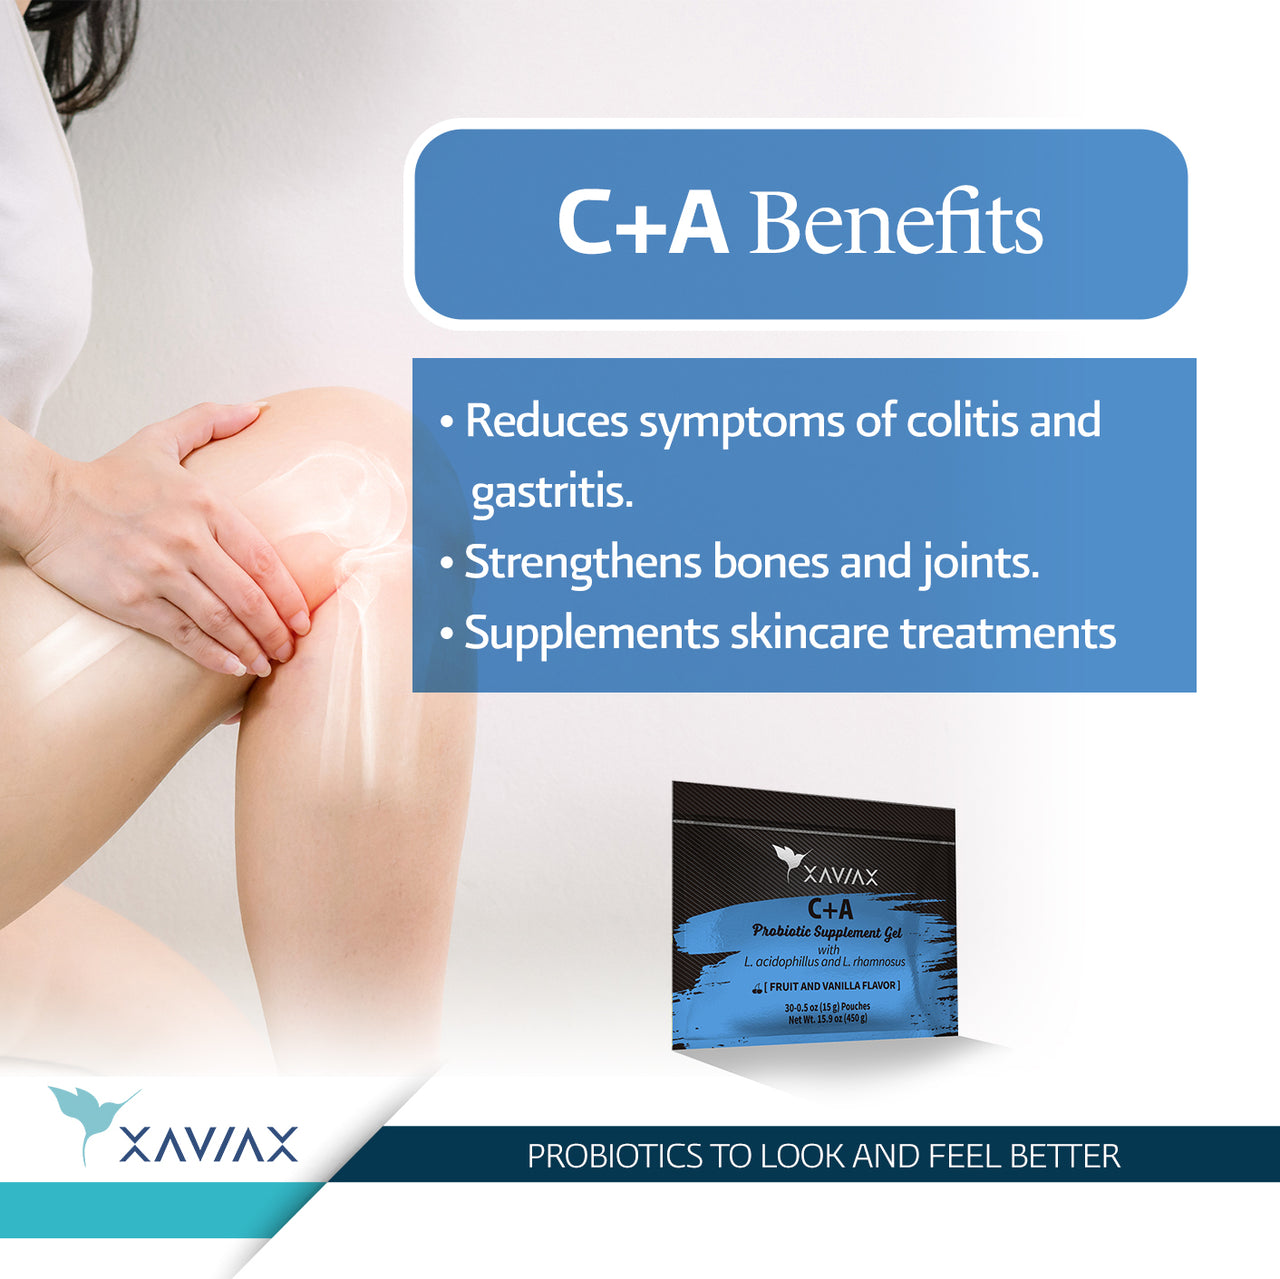 c+a benefits reduces syntoms of colitis and gastritis